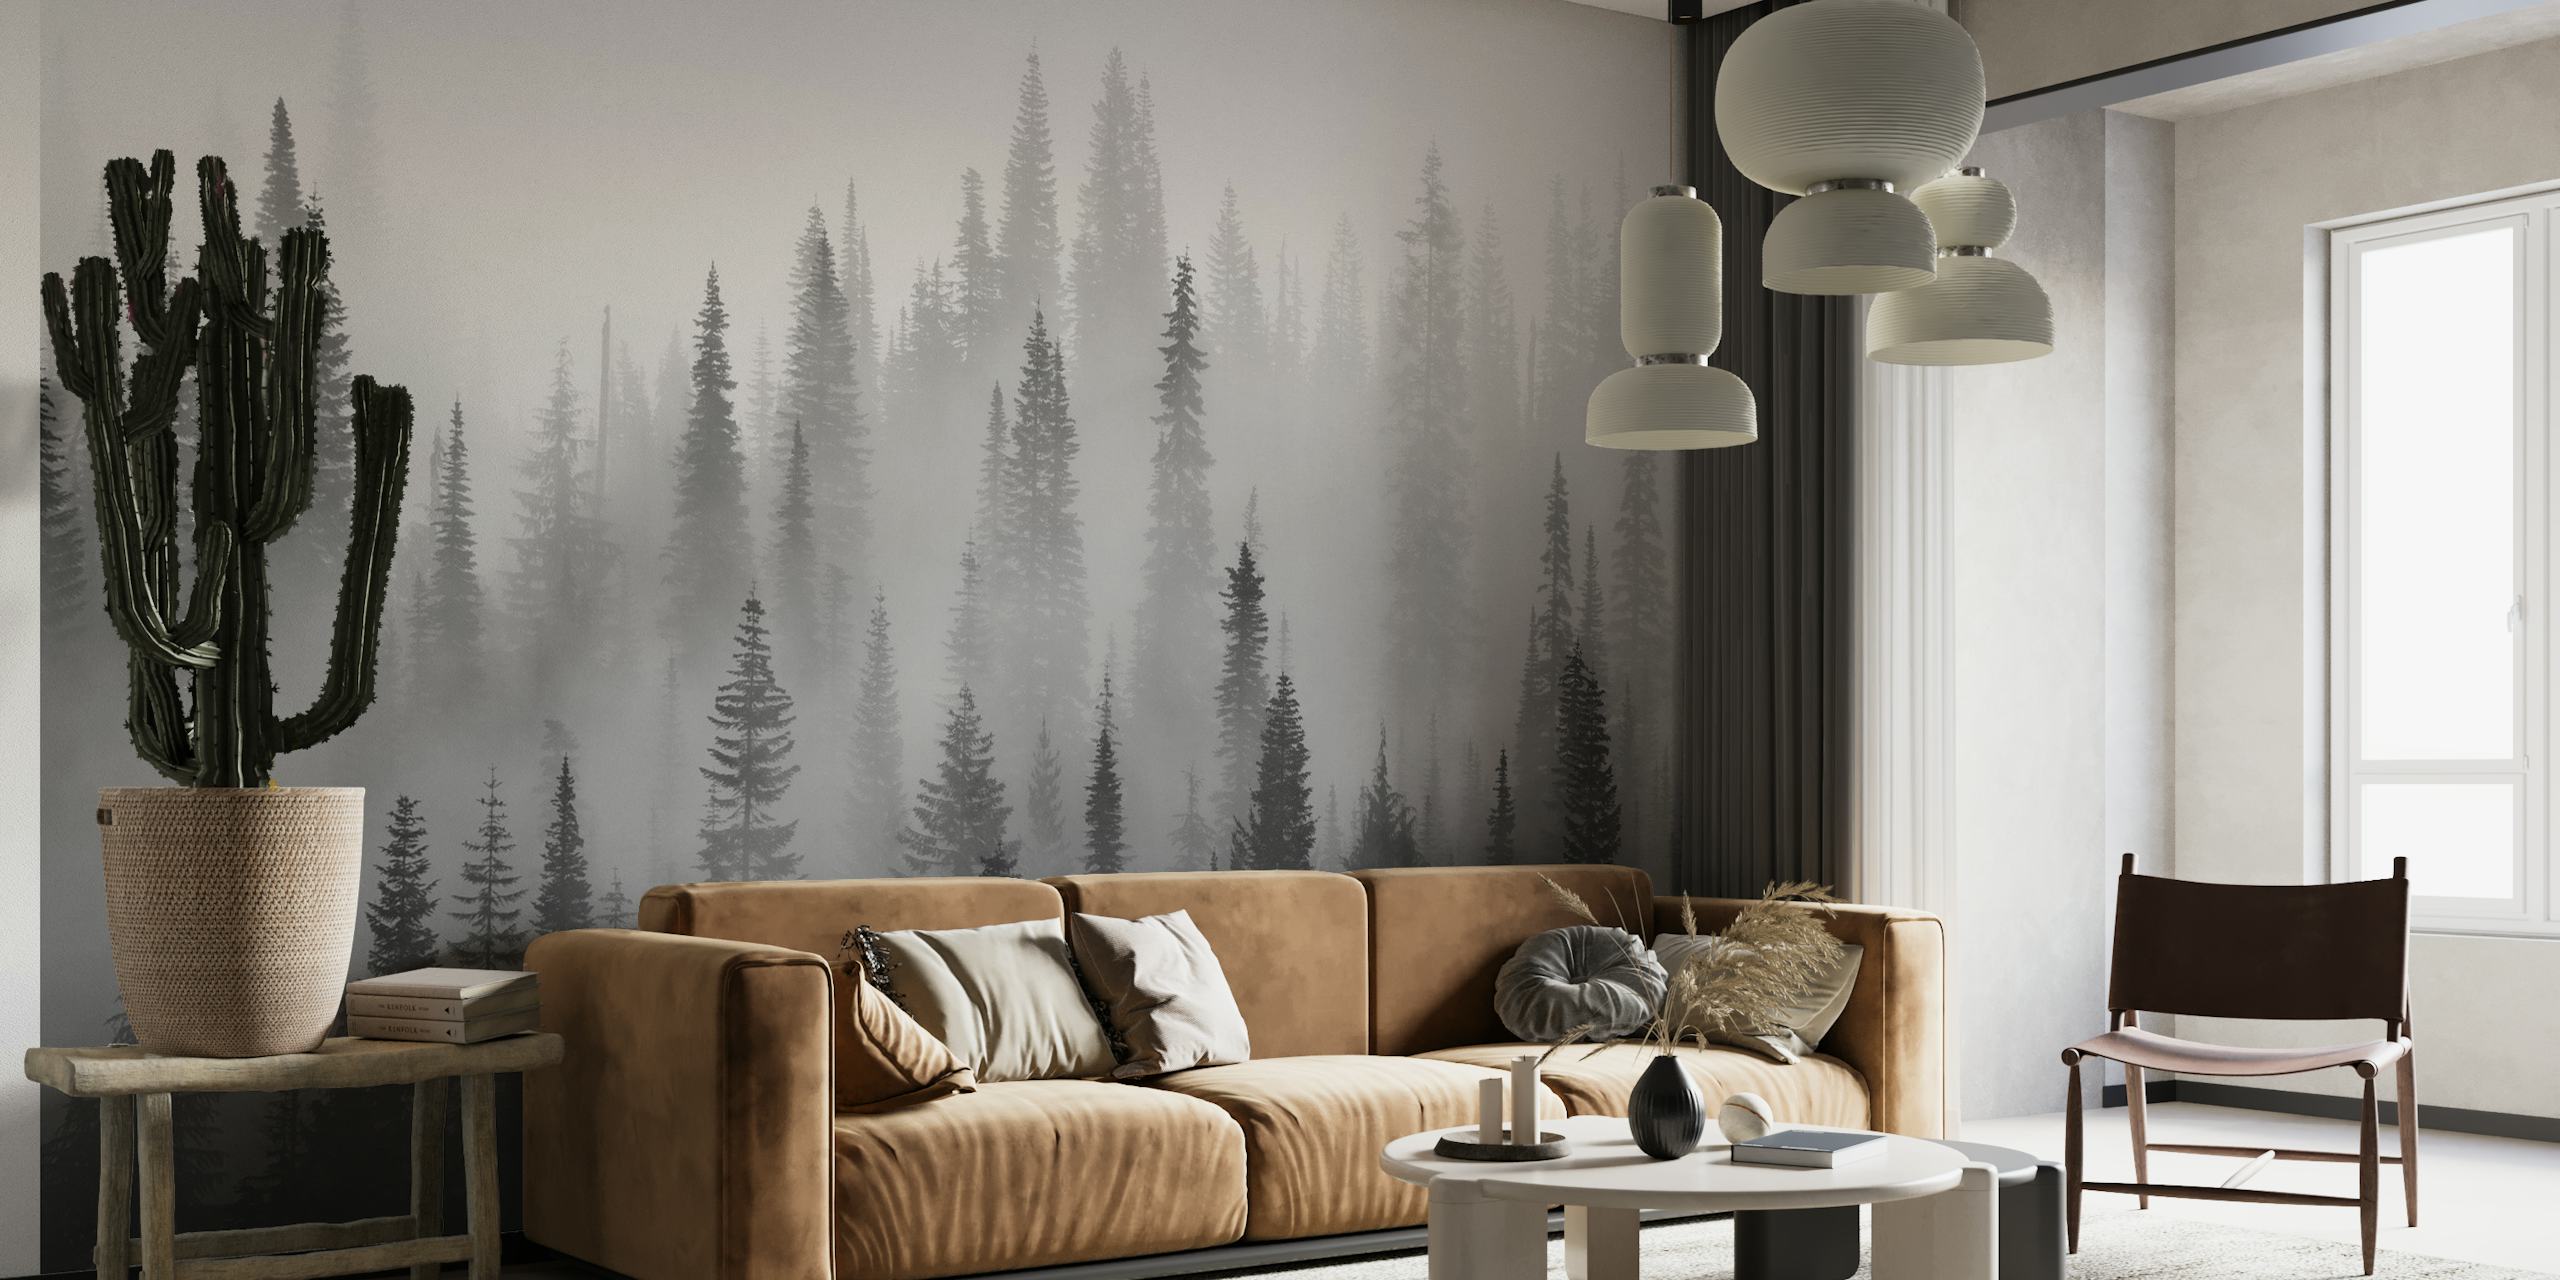 Enchanting black and white forest wallpaper with misty environment setting